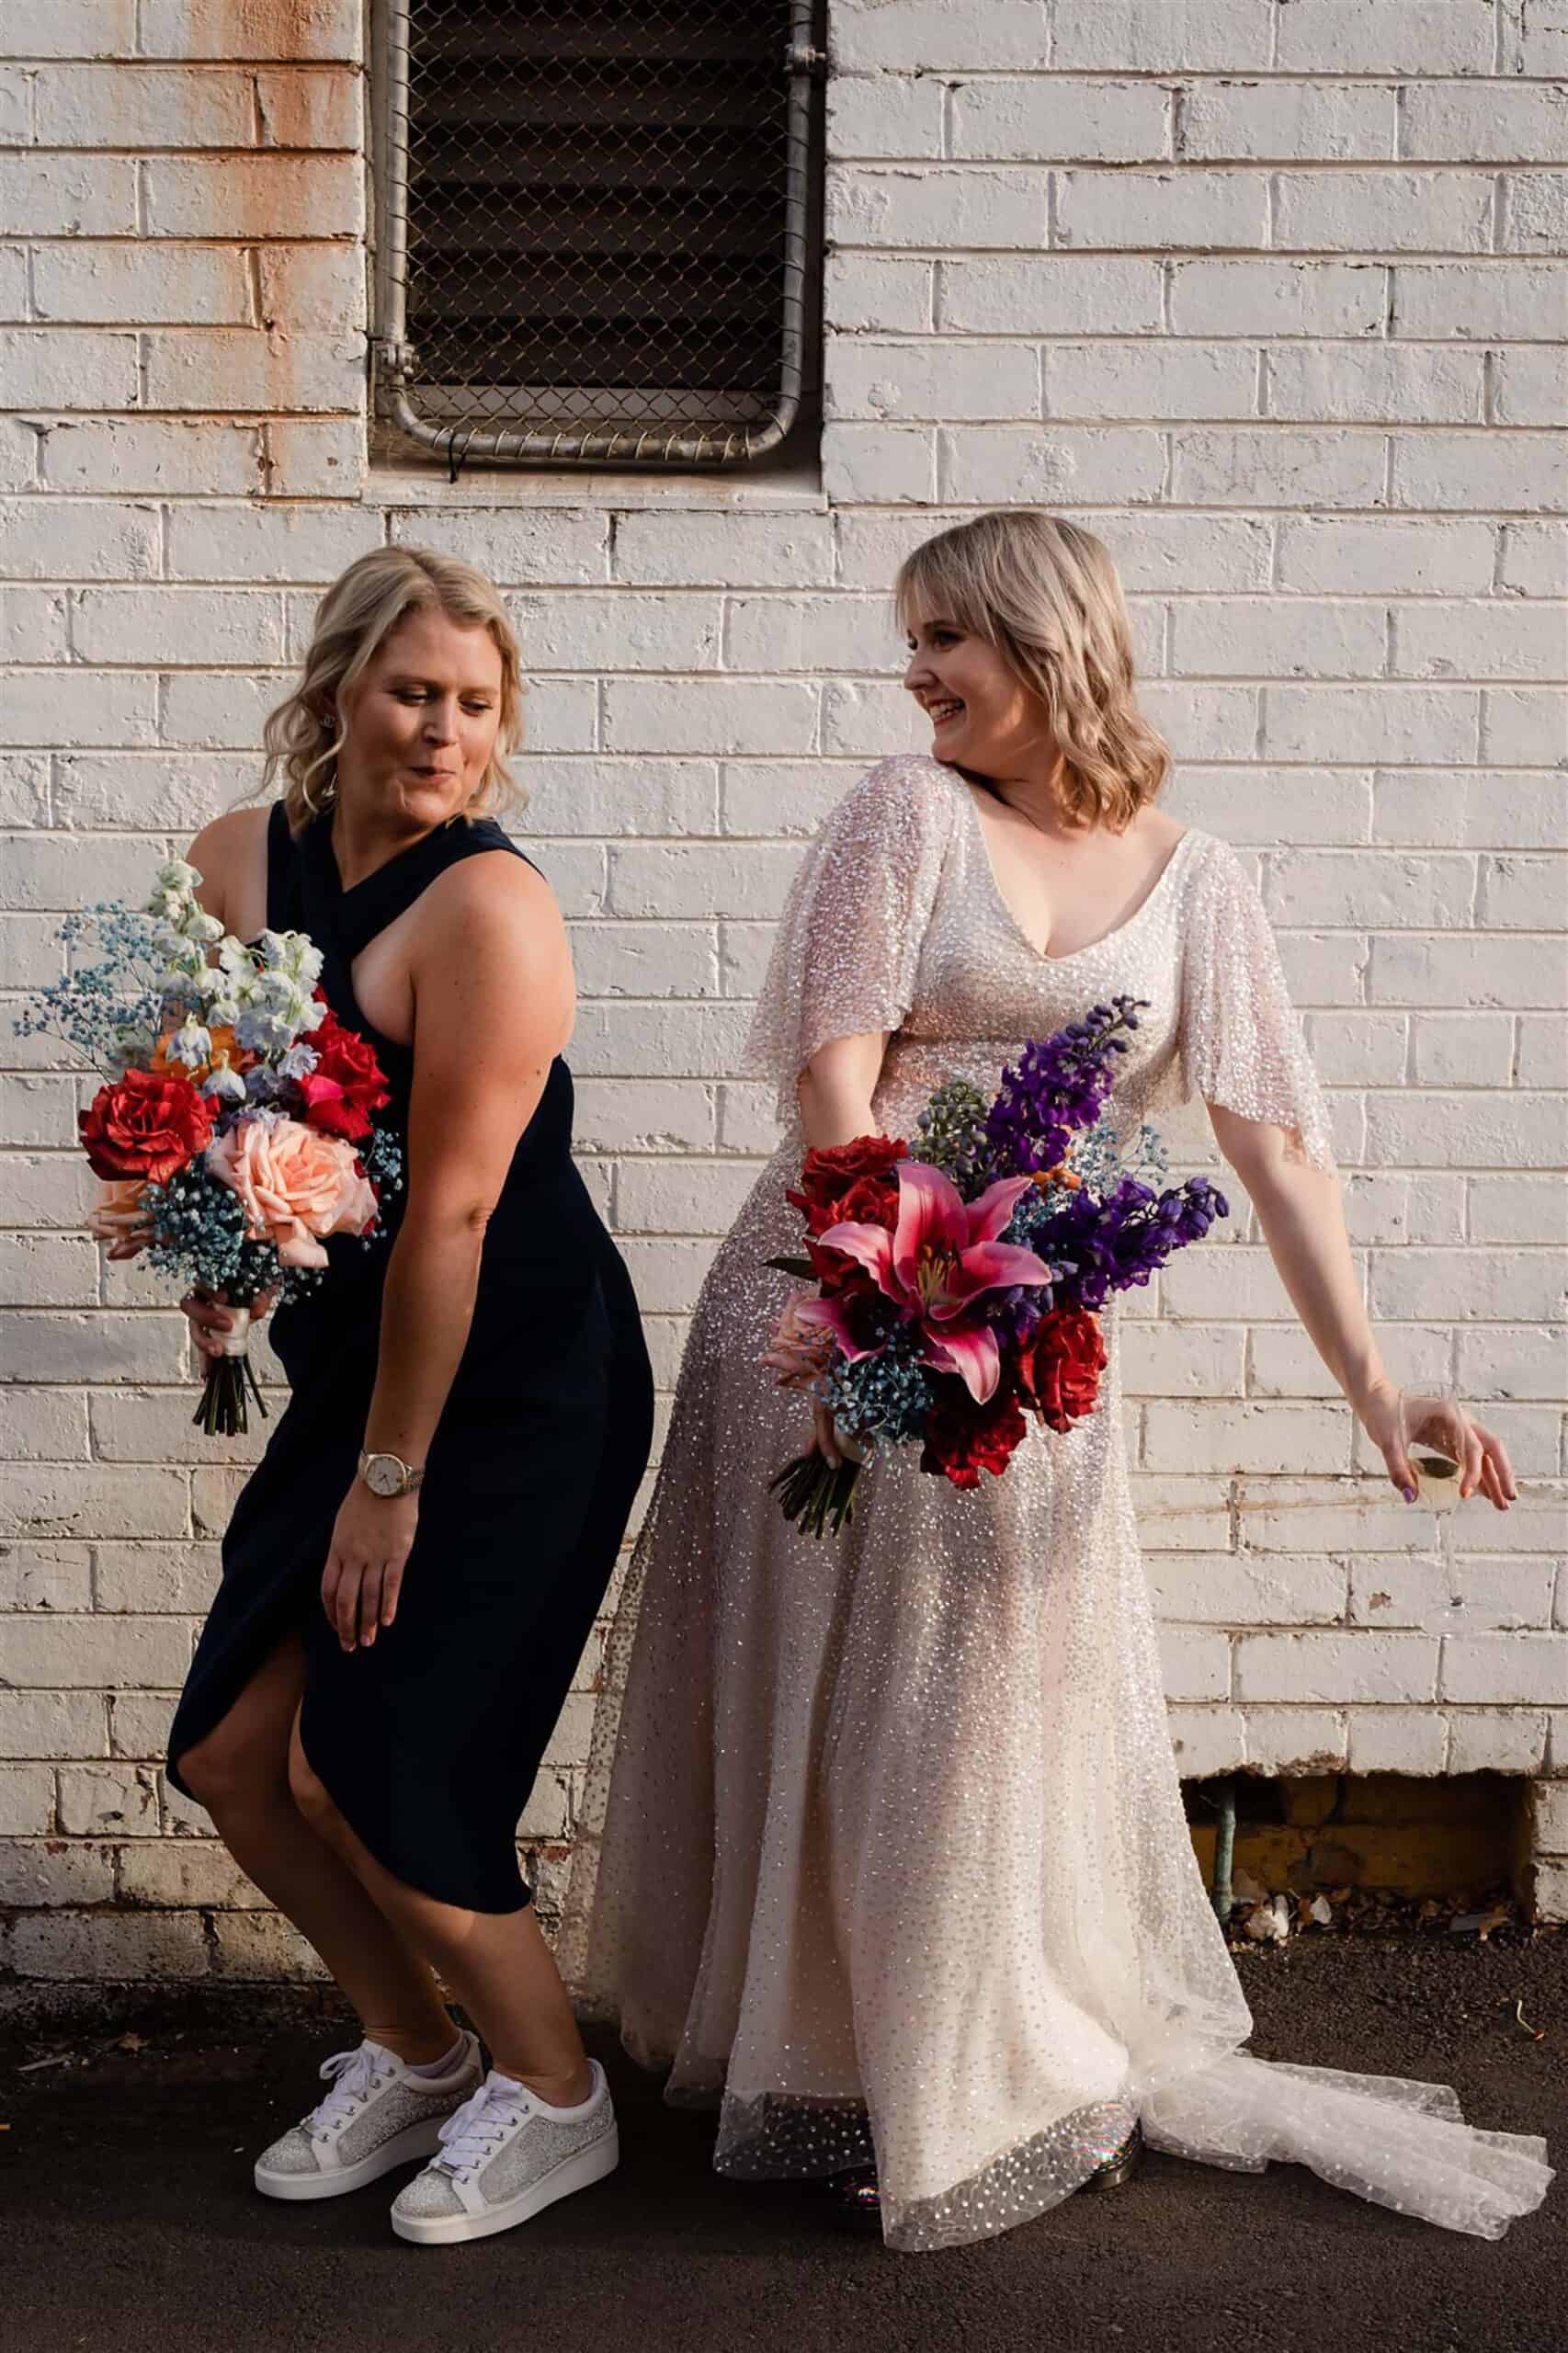 The Bride and Maid of Honour